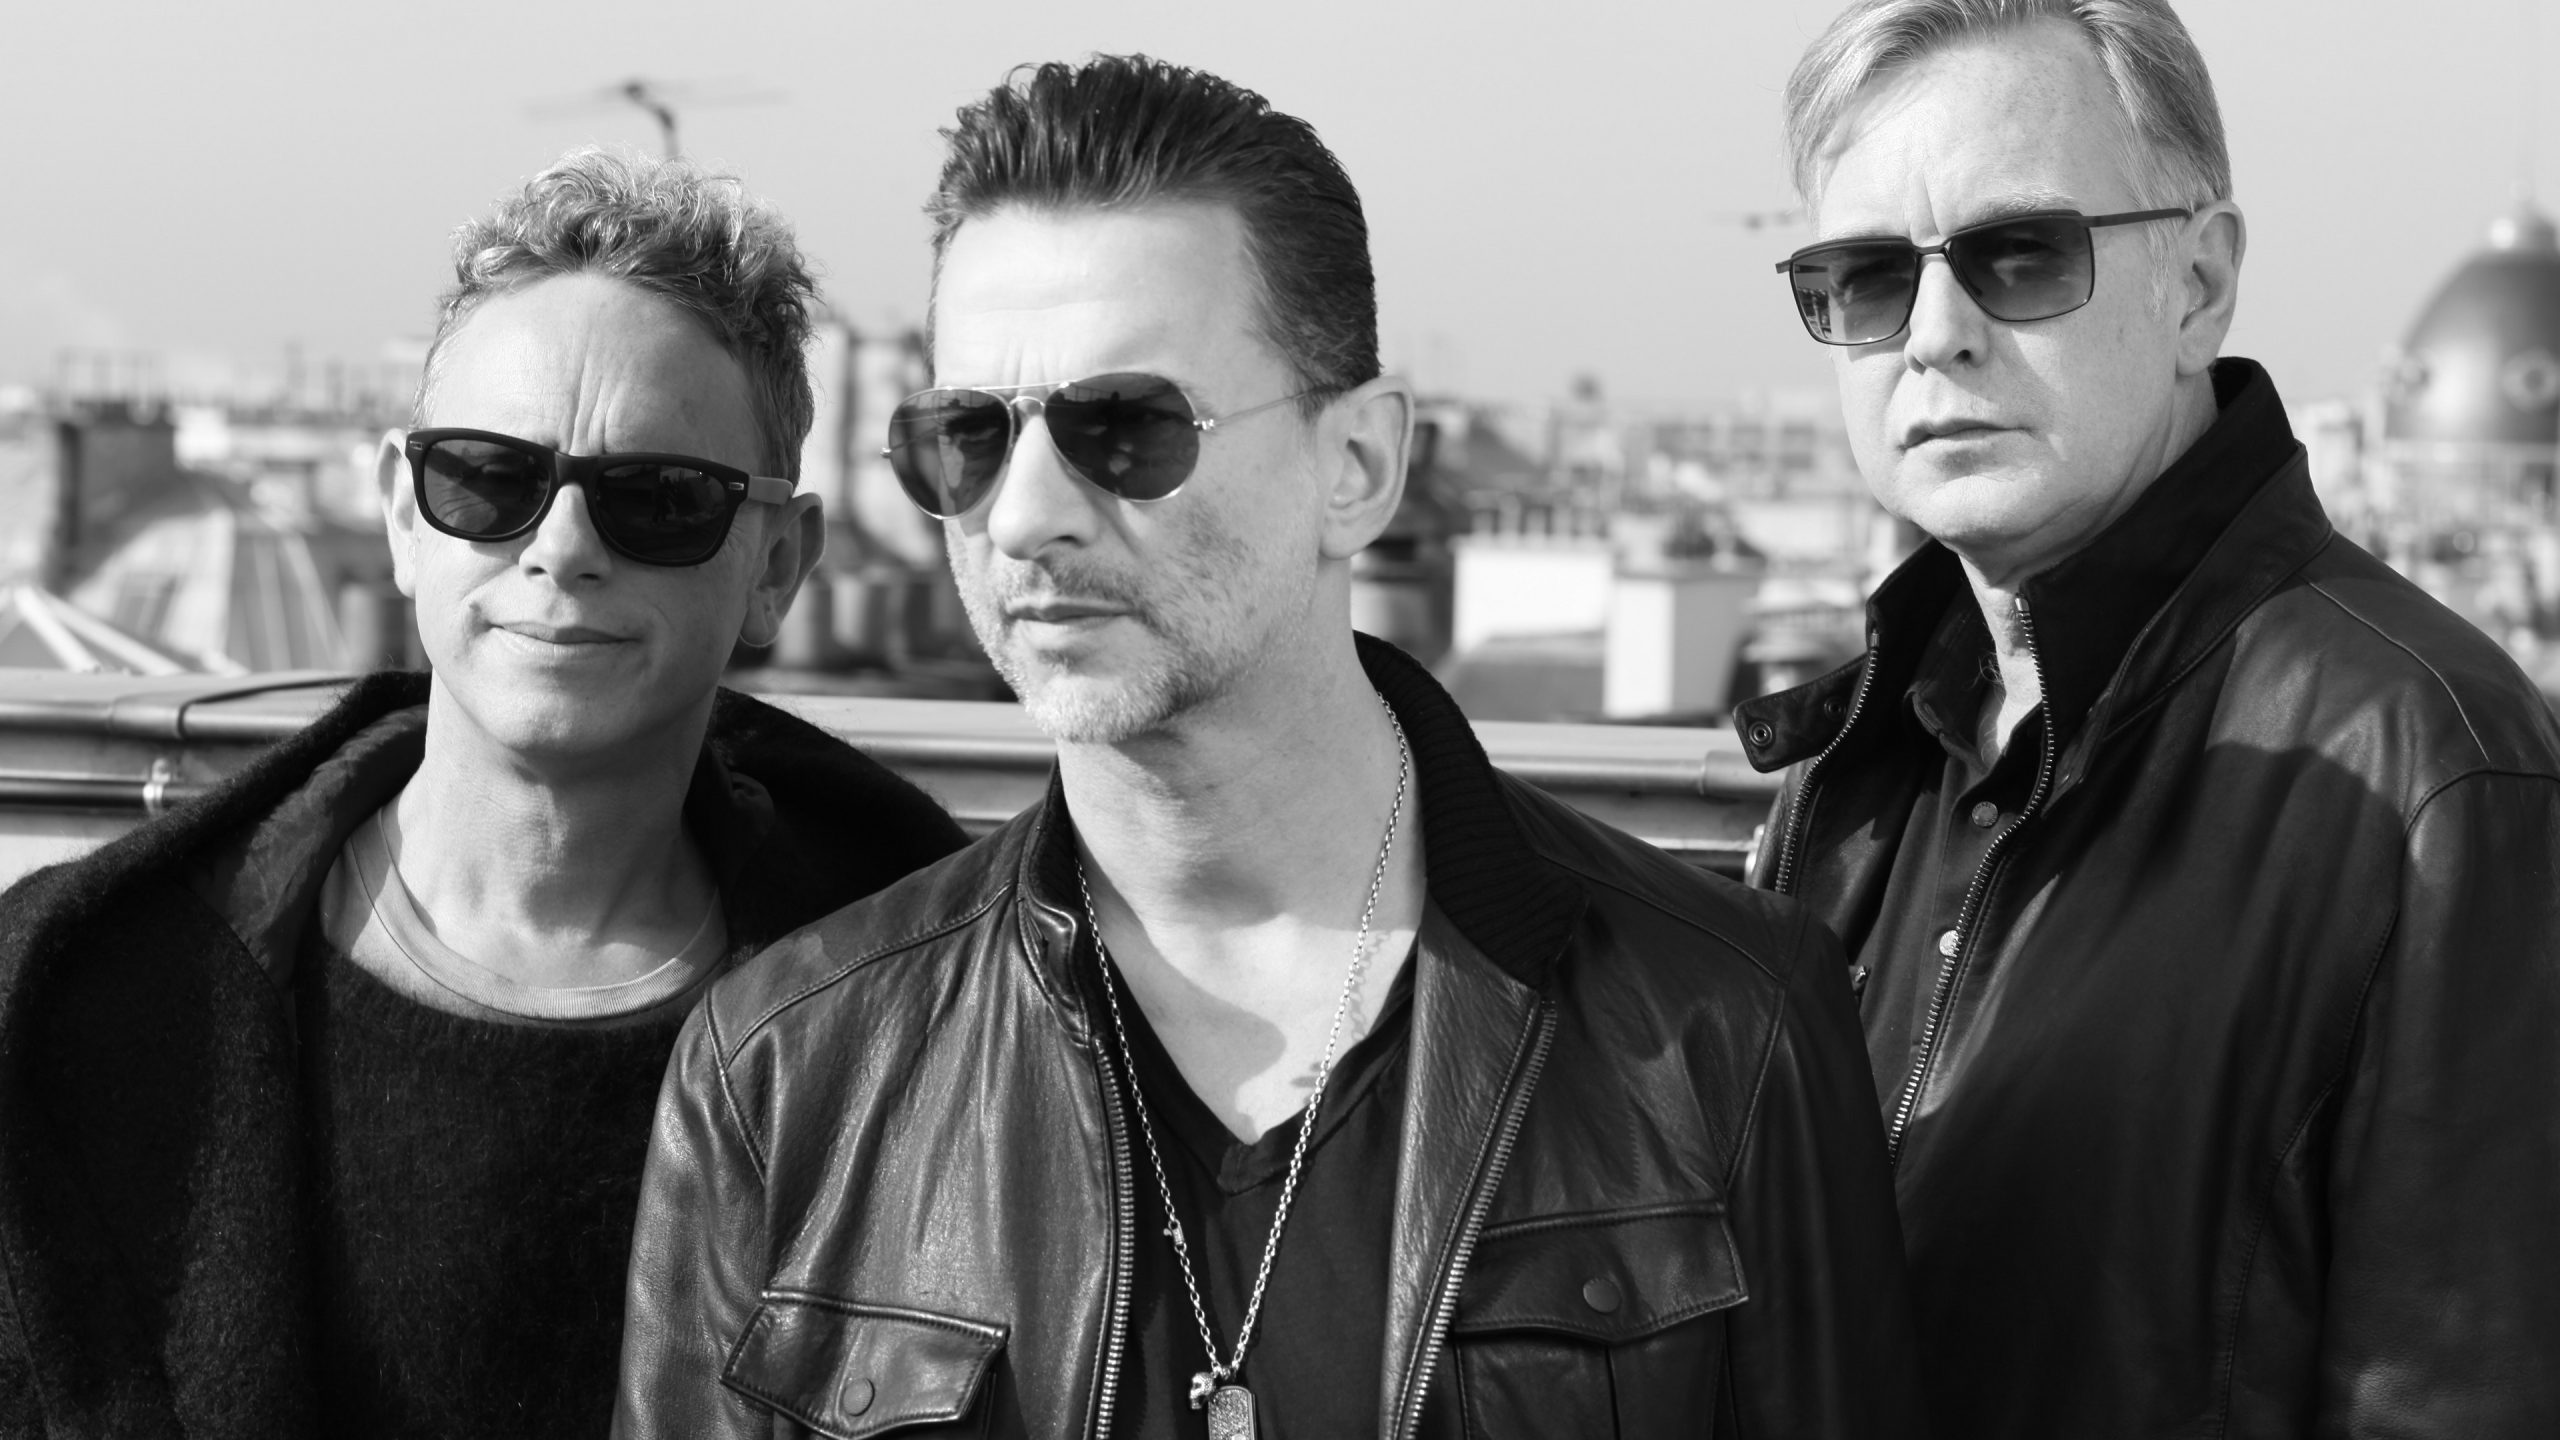 Depeche Mode return Music For The Masses ballad 'I Want You Now